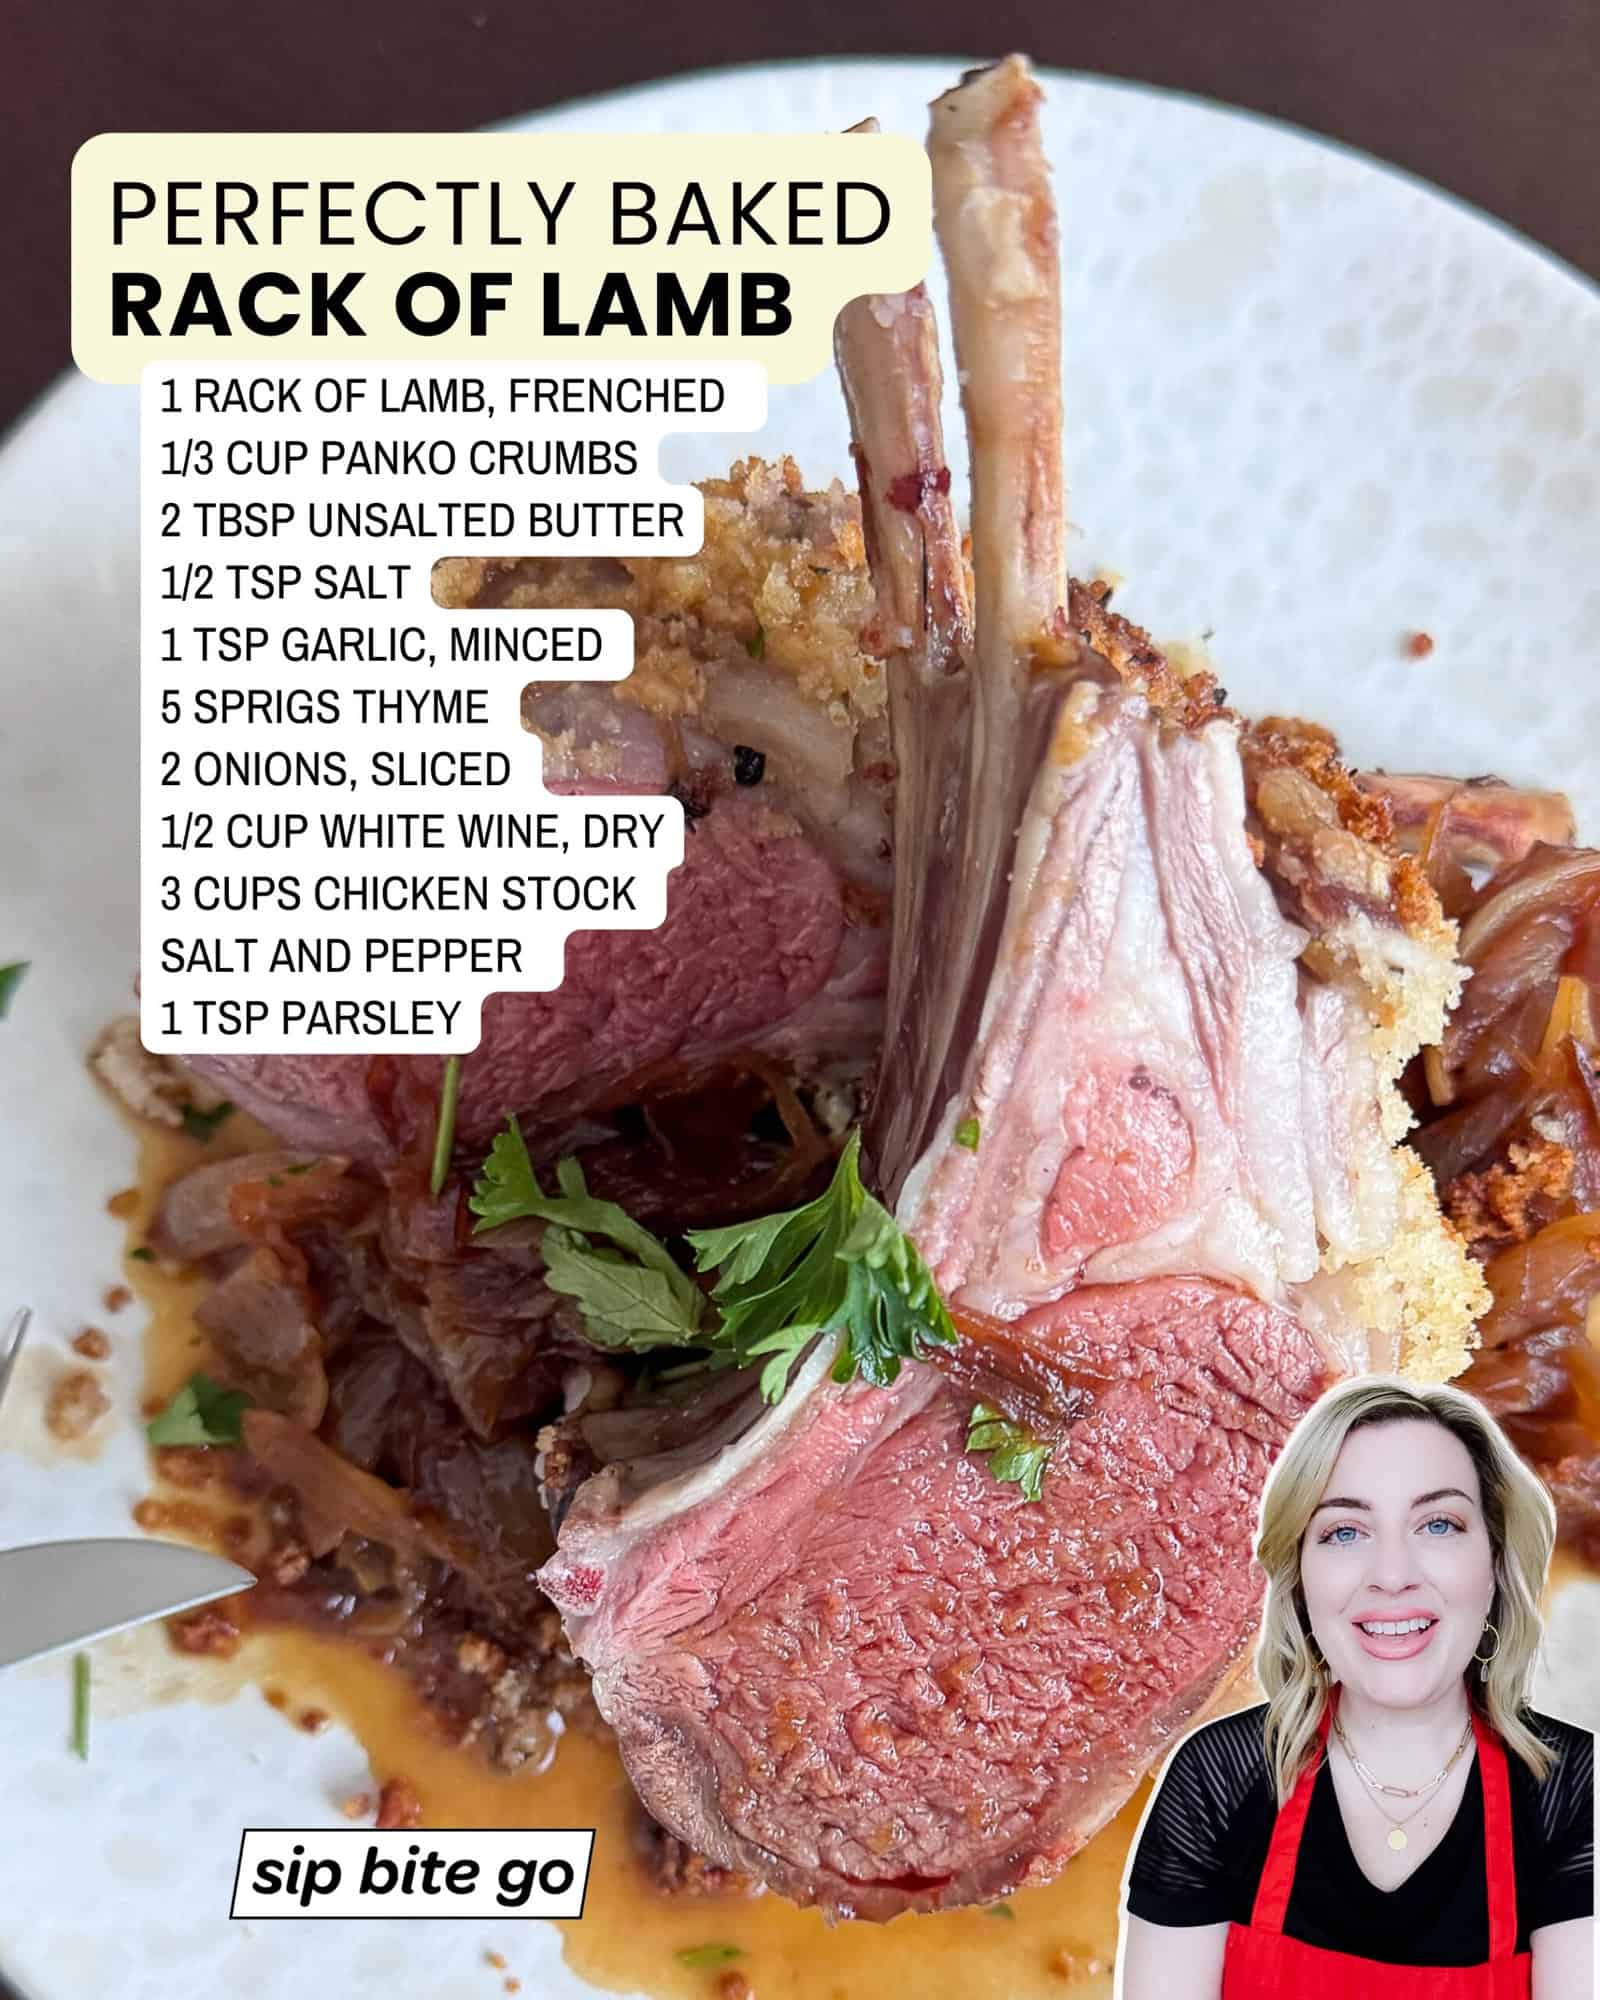 List of ingredients for Baked Rack of Lamb in Oven